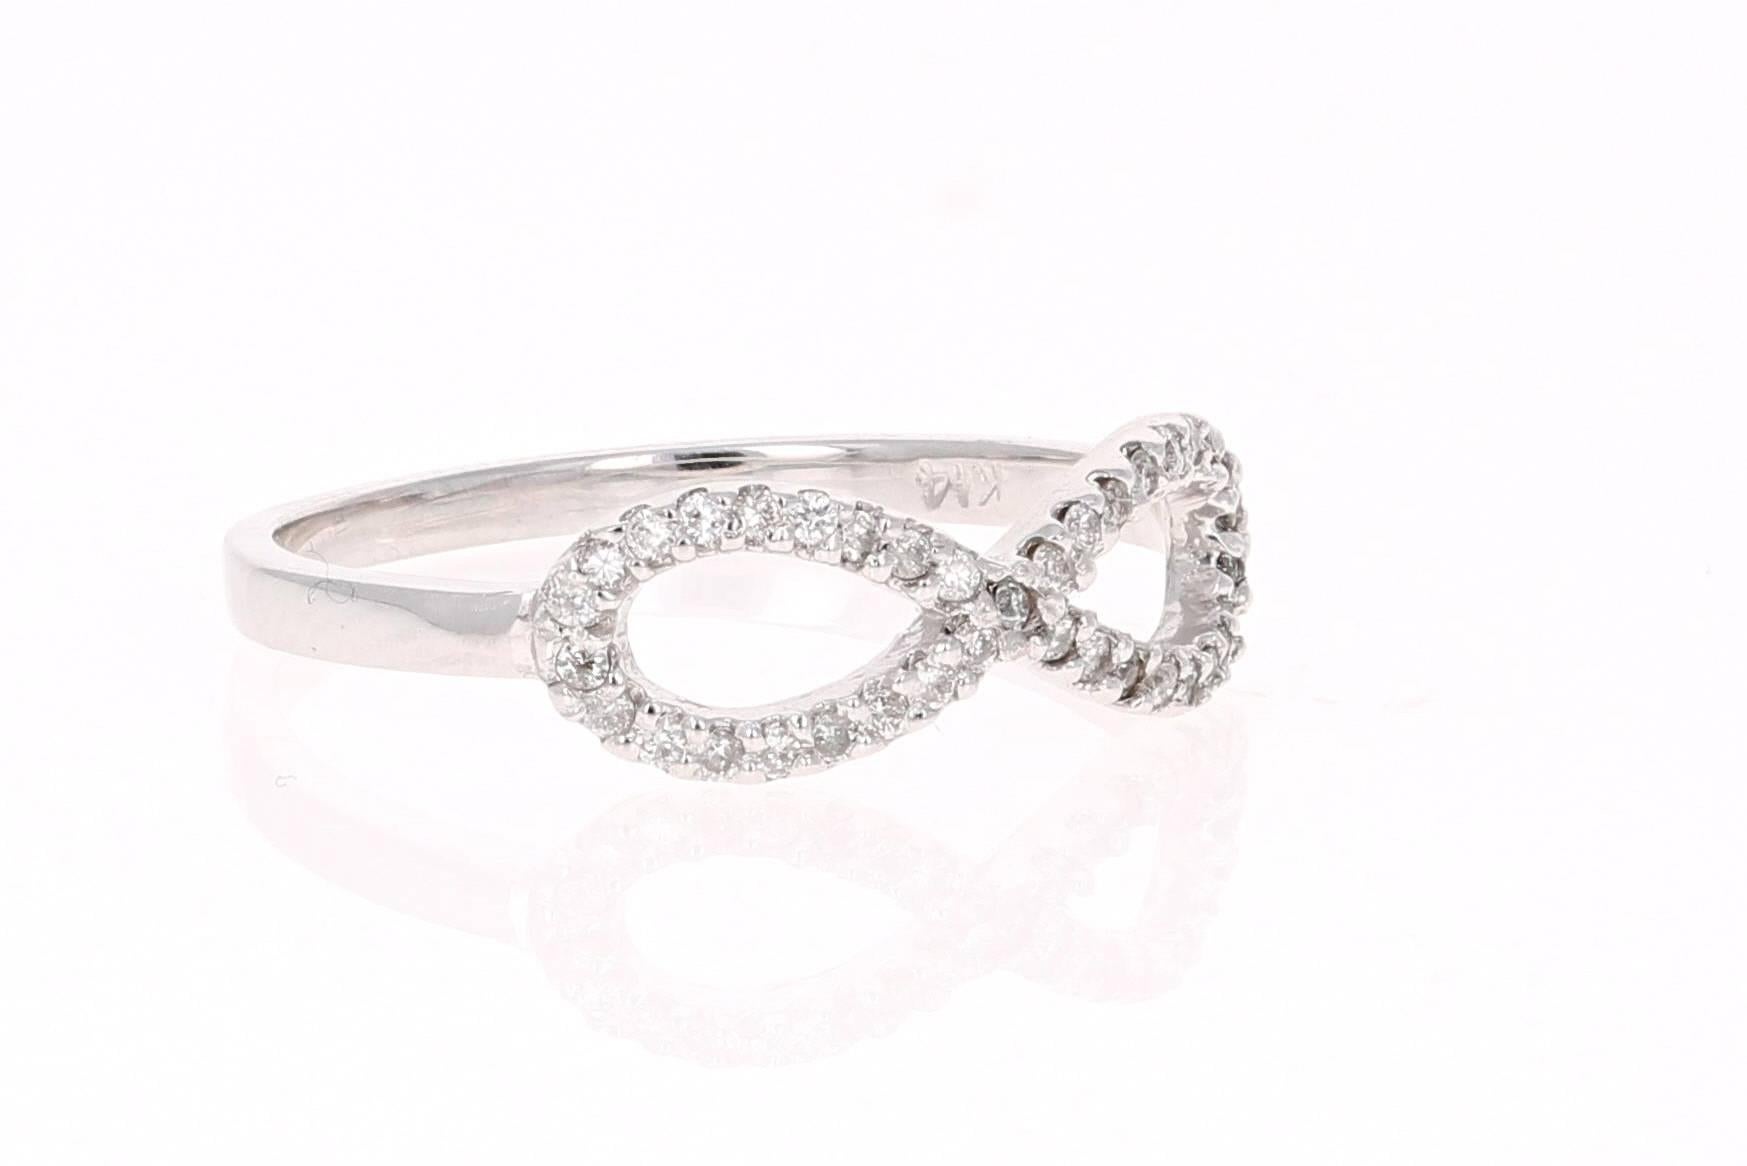 A cute and dainty infinity ring that is sure to be a great addition to your jewelry collection.

It has 37 Round Cut Diamonds that weigh a total of 0.17 carats.  It is made in 14K White Gold and weighs 1.7 grams.  

Complimentary ring sizing is